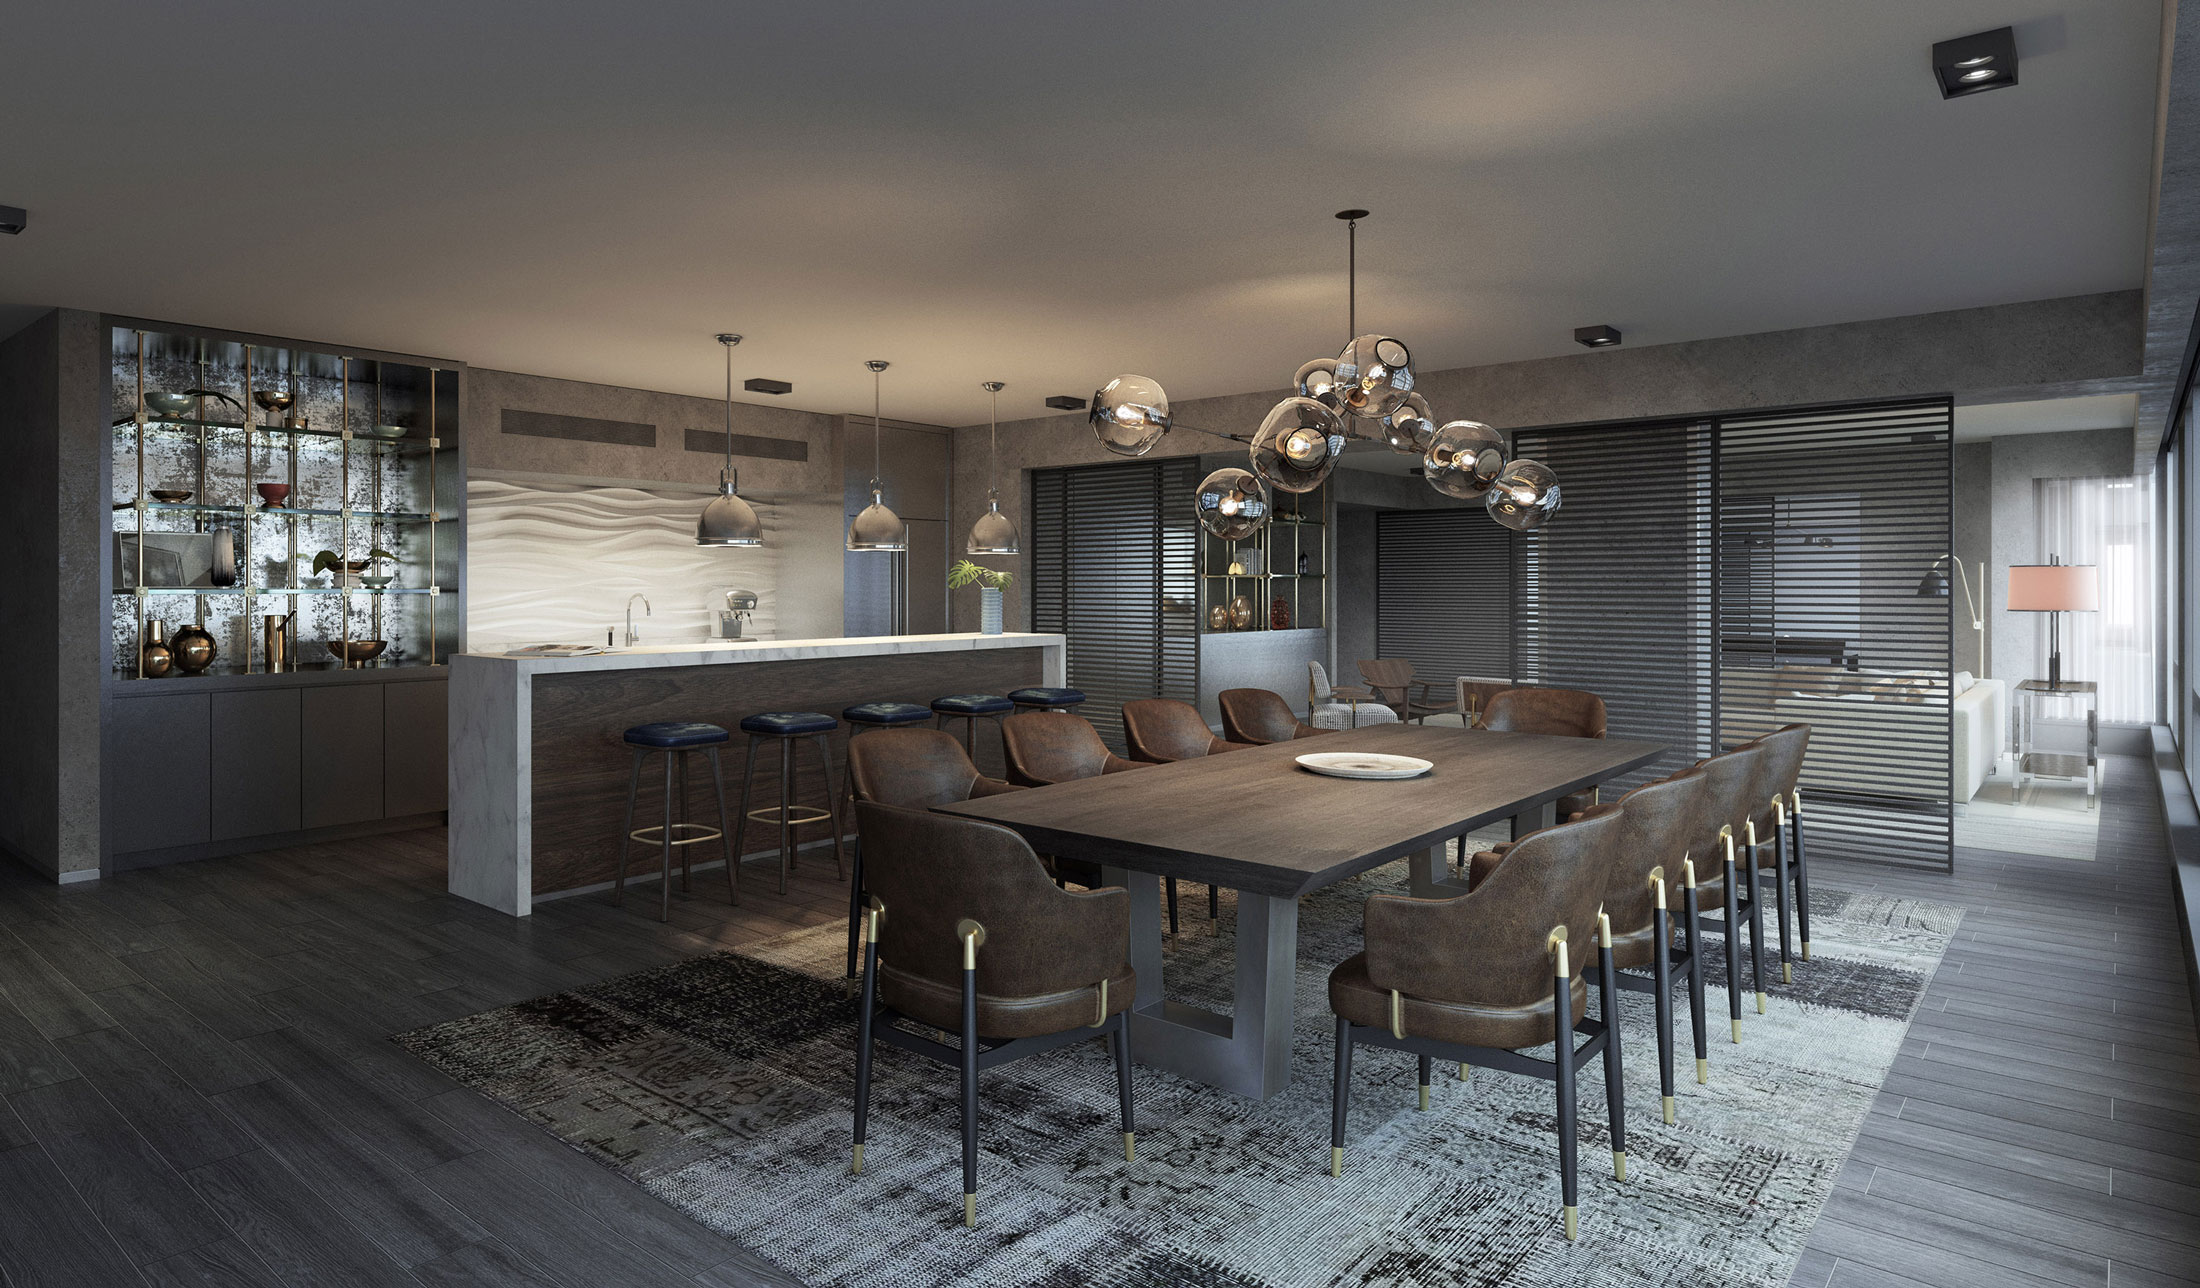 Architectural Rendering of the interior of the One Hill South project located in Washington, DC